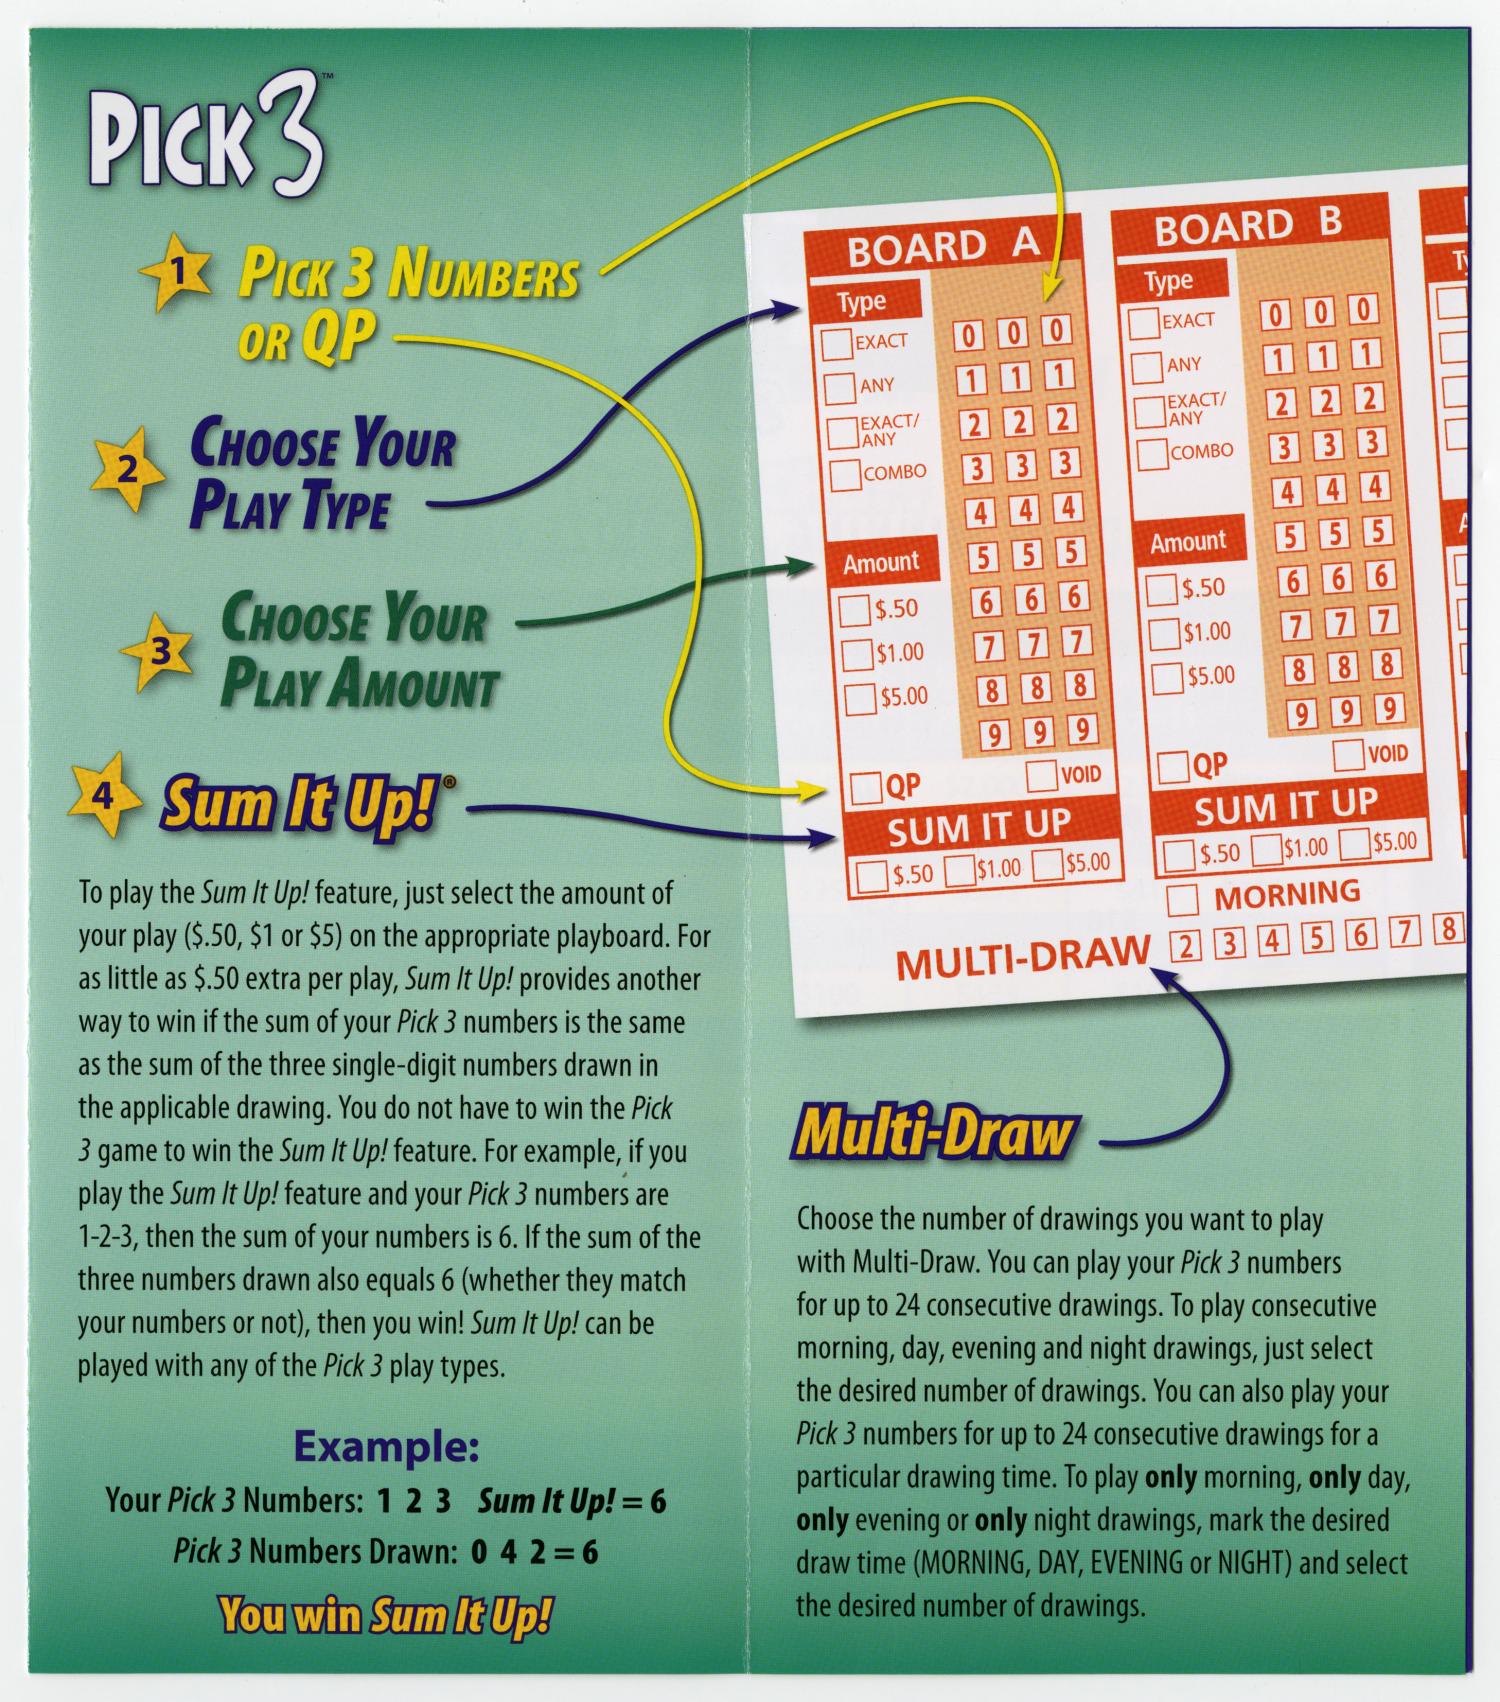 What is a missing corner lot and effective lottery prediction experience